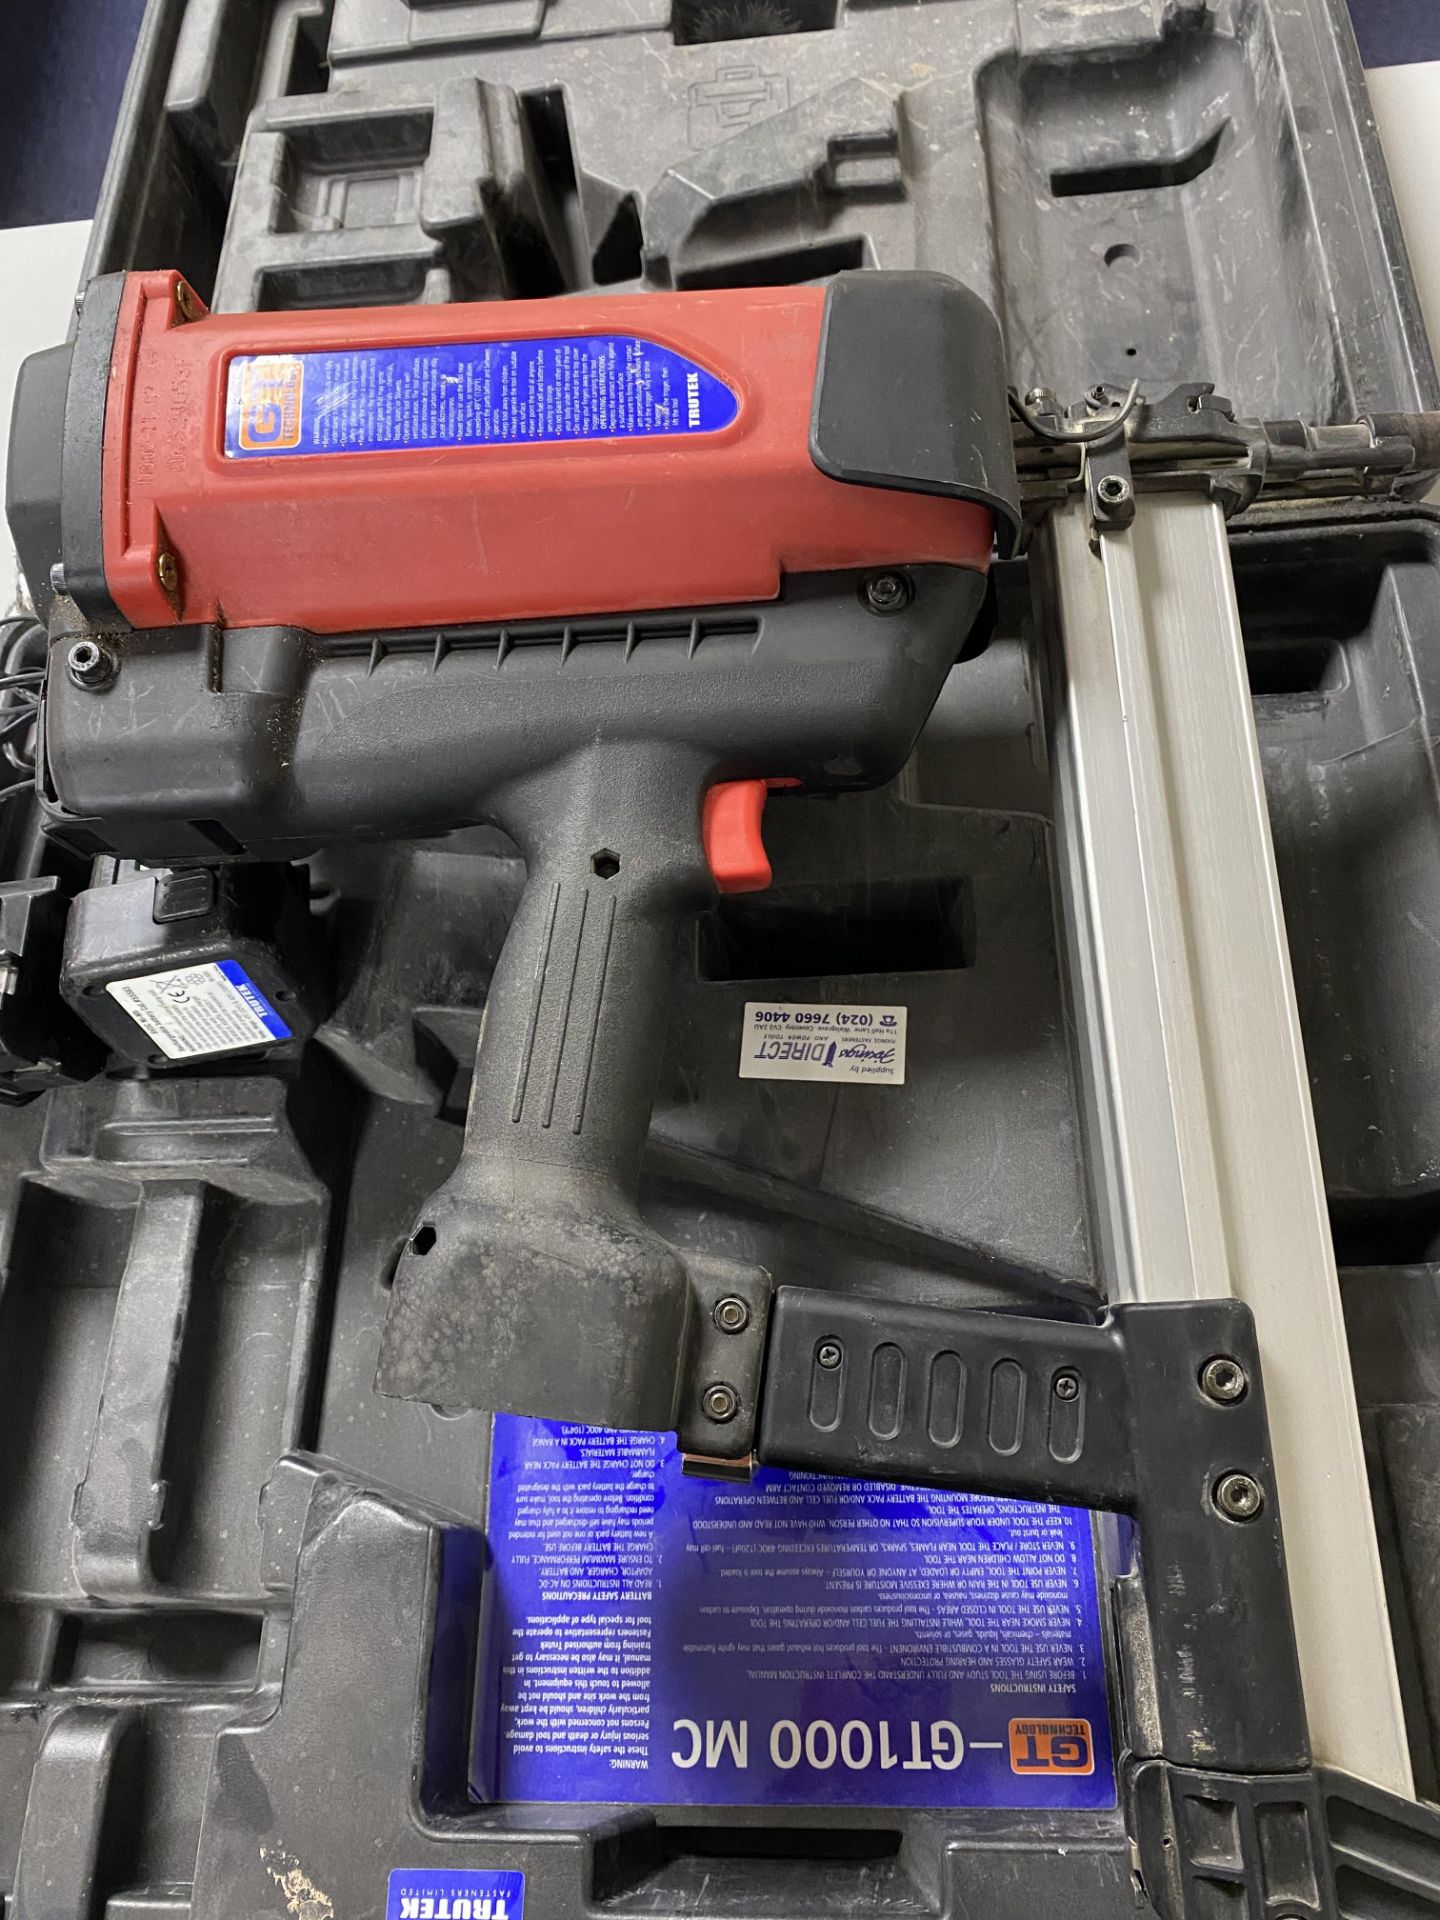 Trutek GT1000 MC Gas Powered Nail Gun in Carry Case with 2: Batteries & 1: Charger - Image 2 of 4